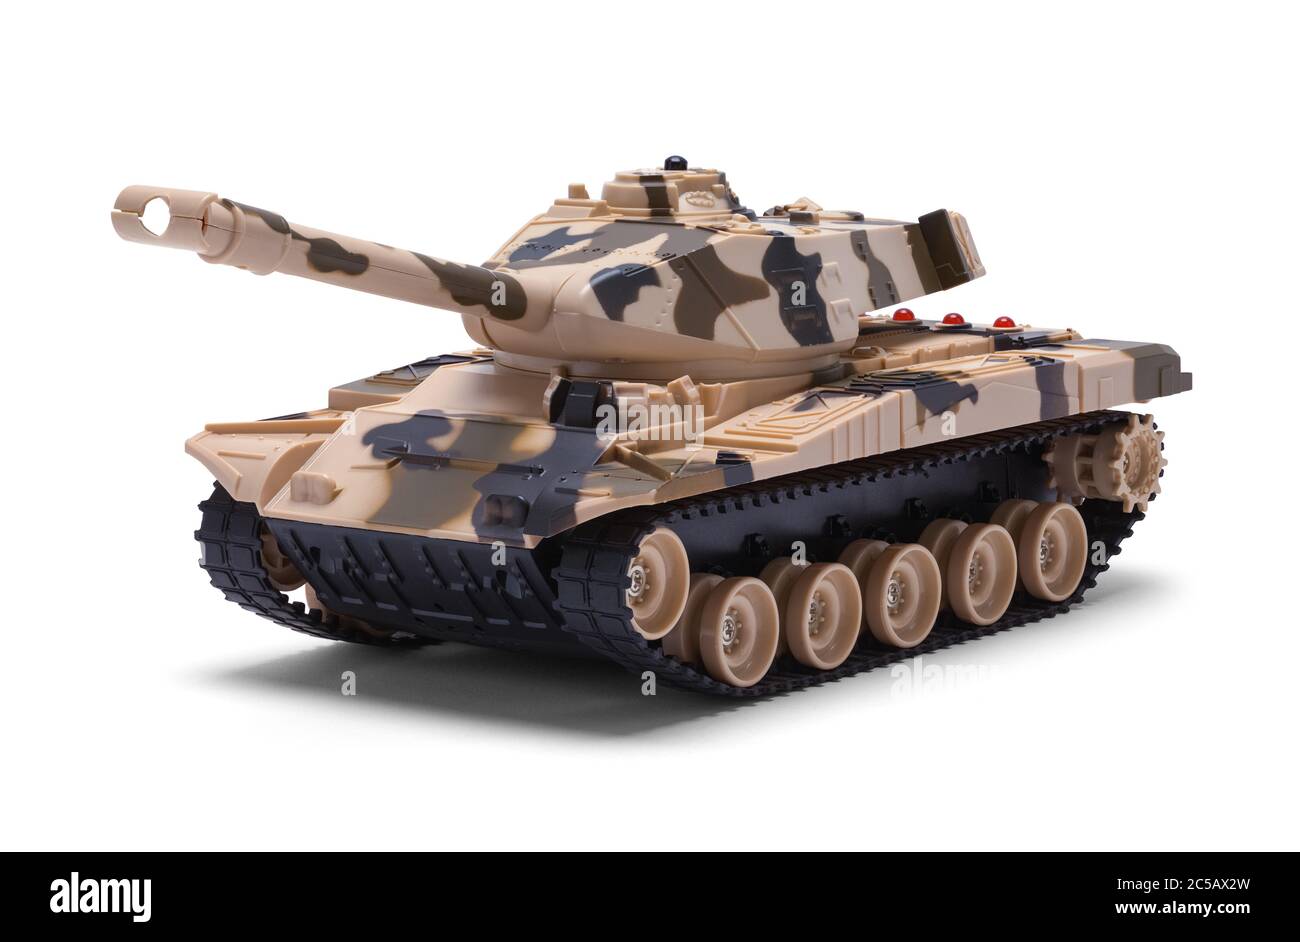 Armored Military Toy Tank Isolated on White. Stock Photo